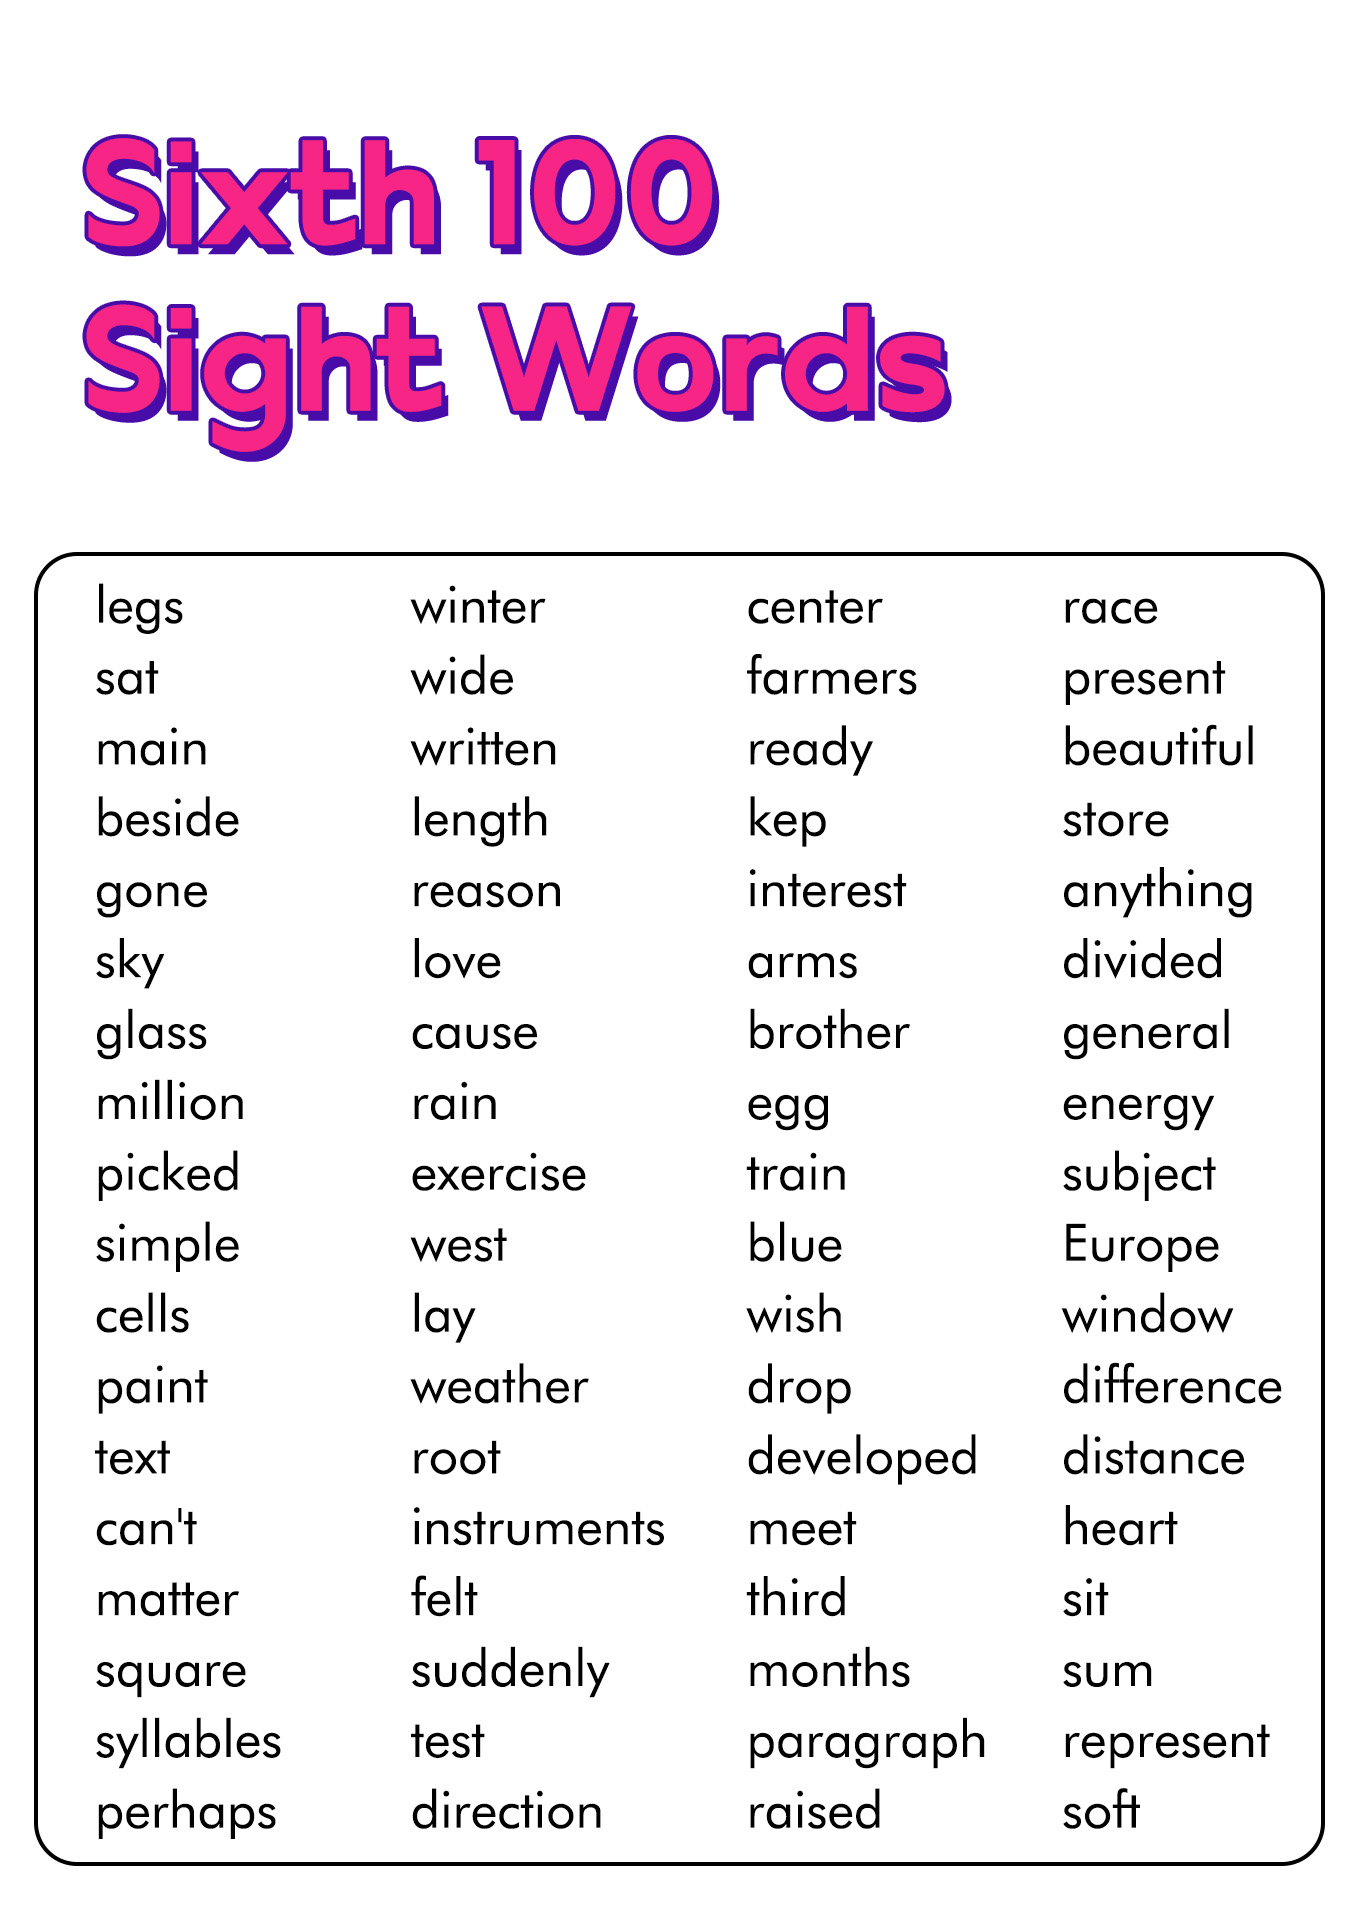 15-best-images-of-6th-grade-spelling-words-worksheets-6th-grade